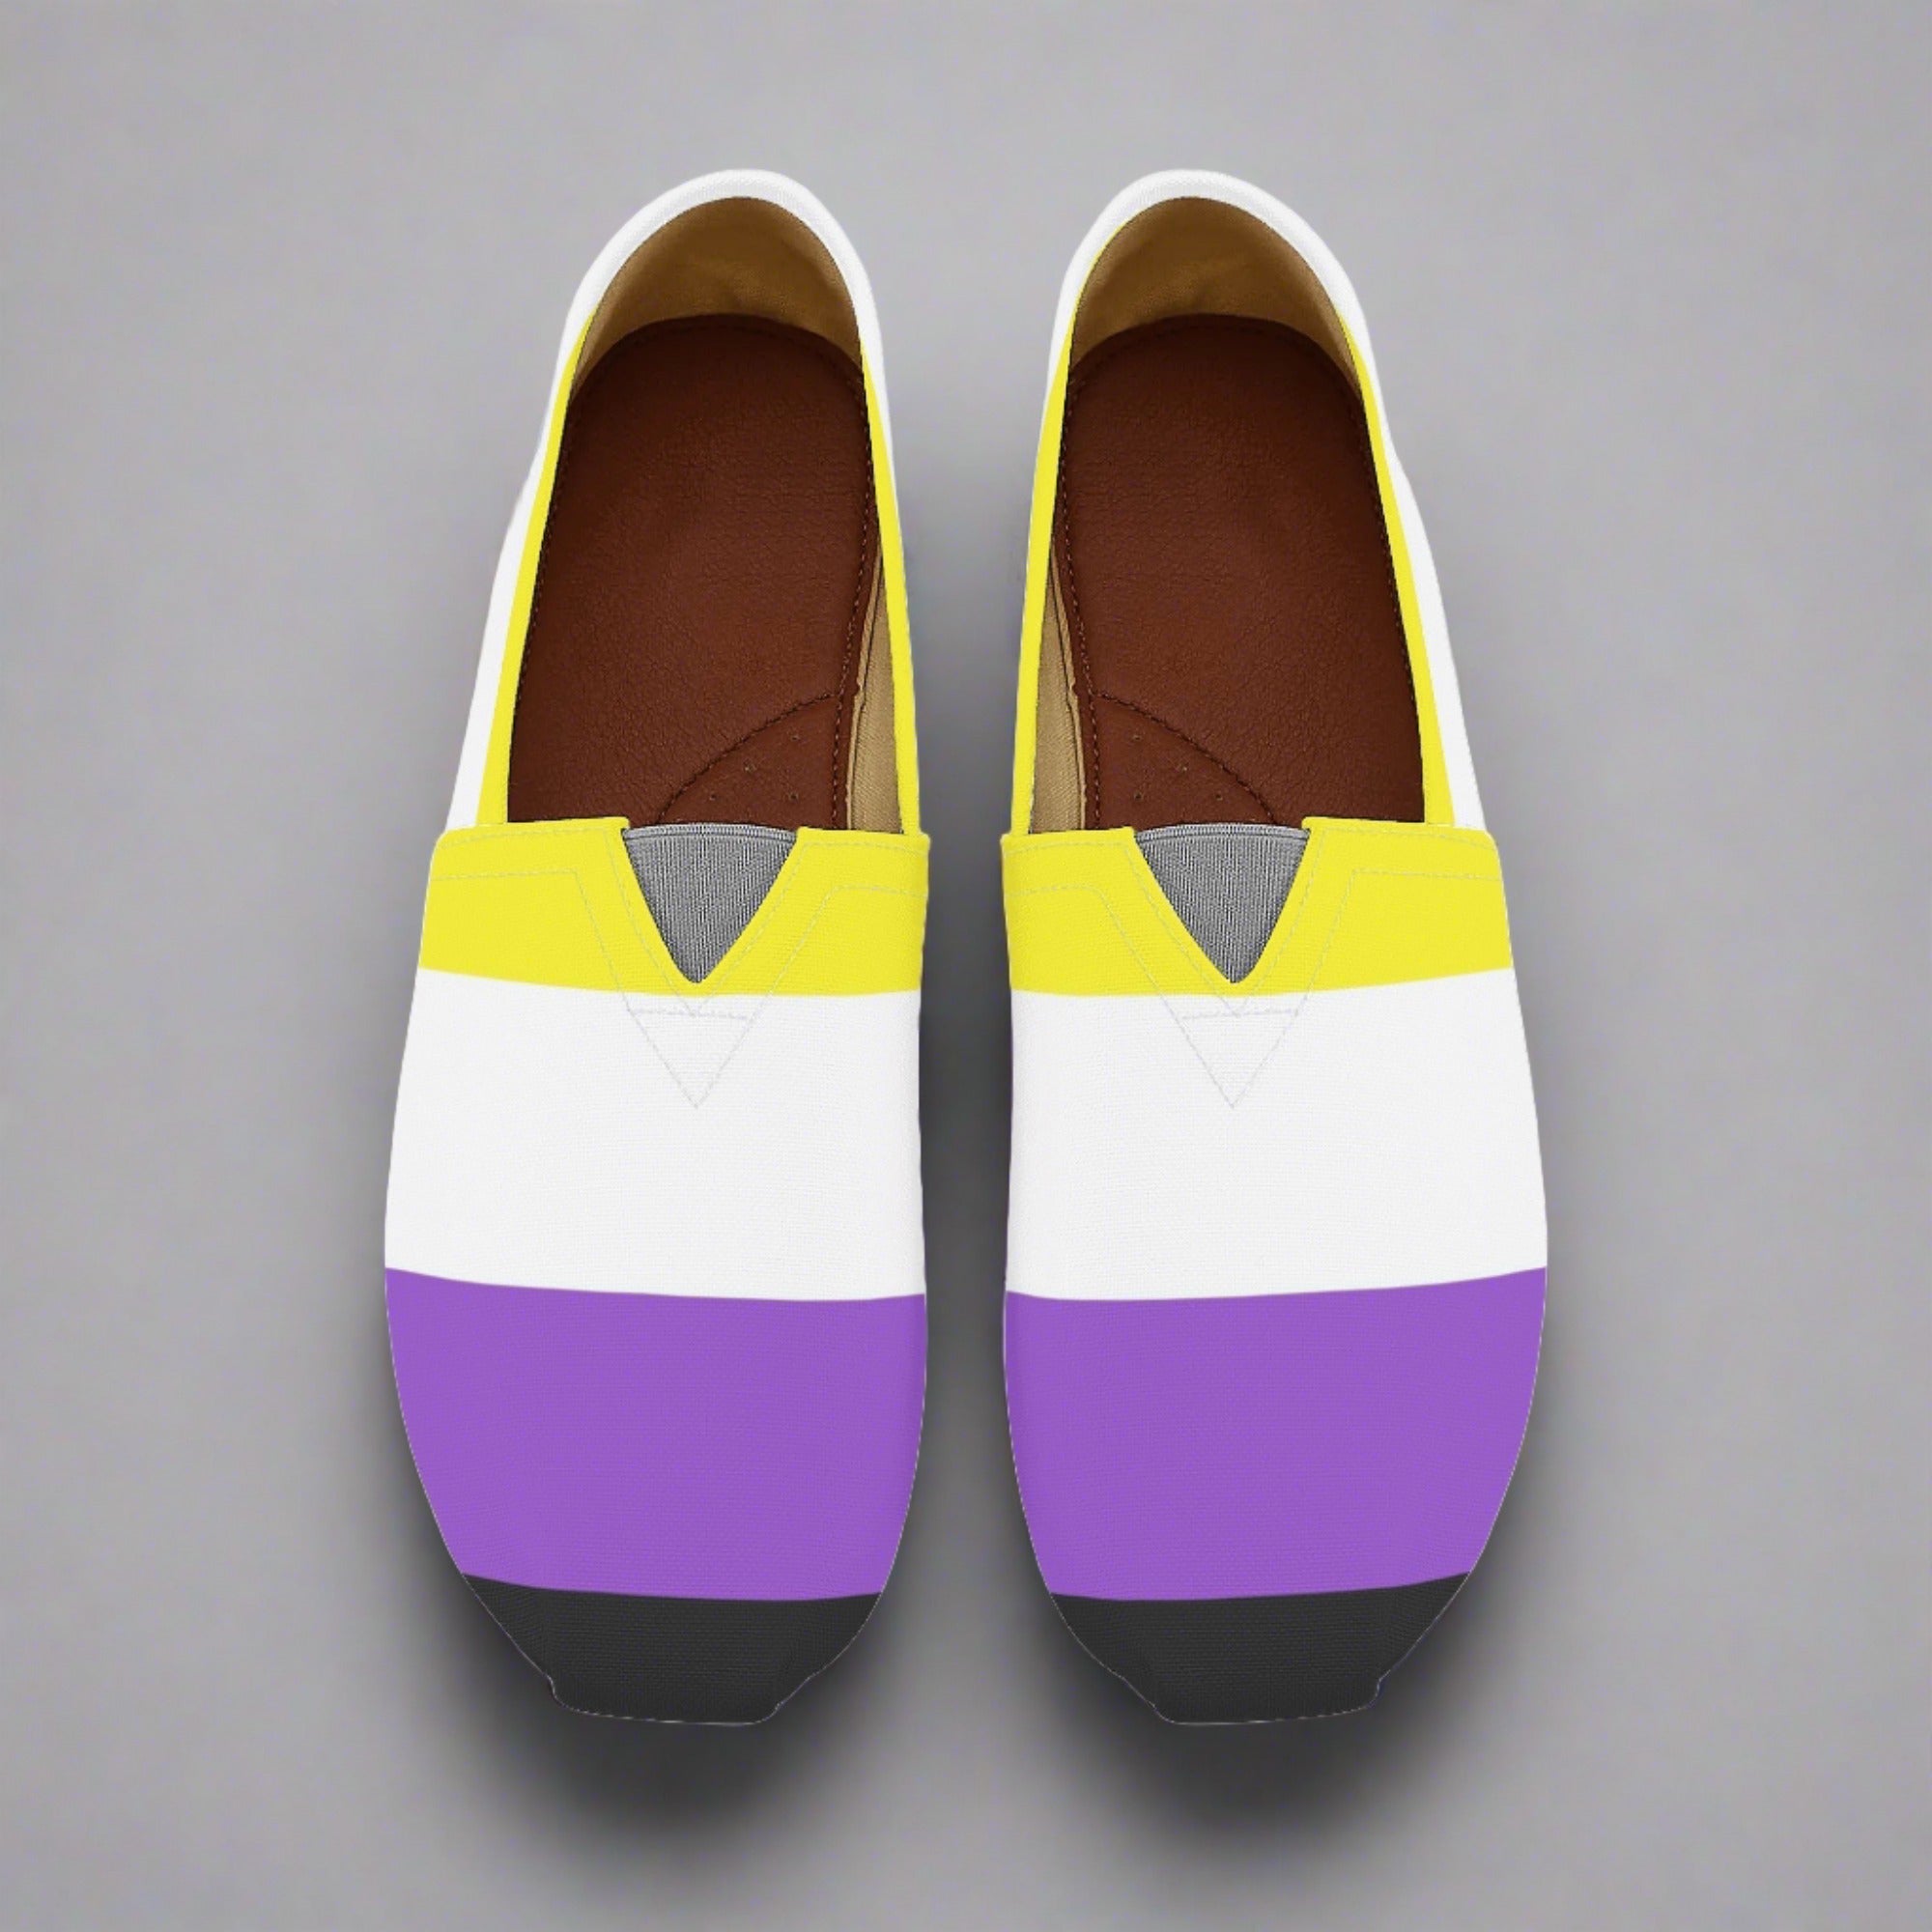 Non-binary Pride Flag Slip-On Canvas Shoes (Mens Sizing) - Rose Gold Co. Shop